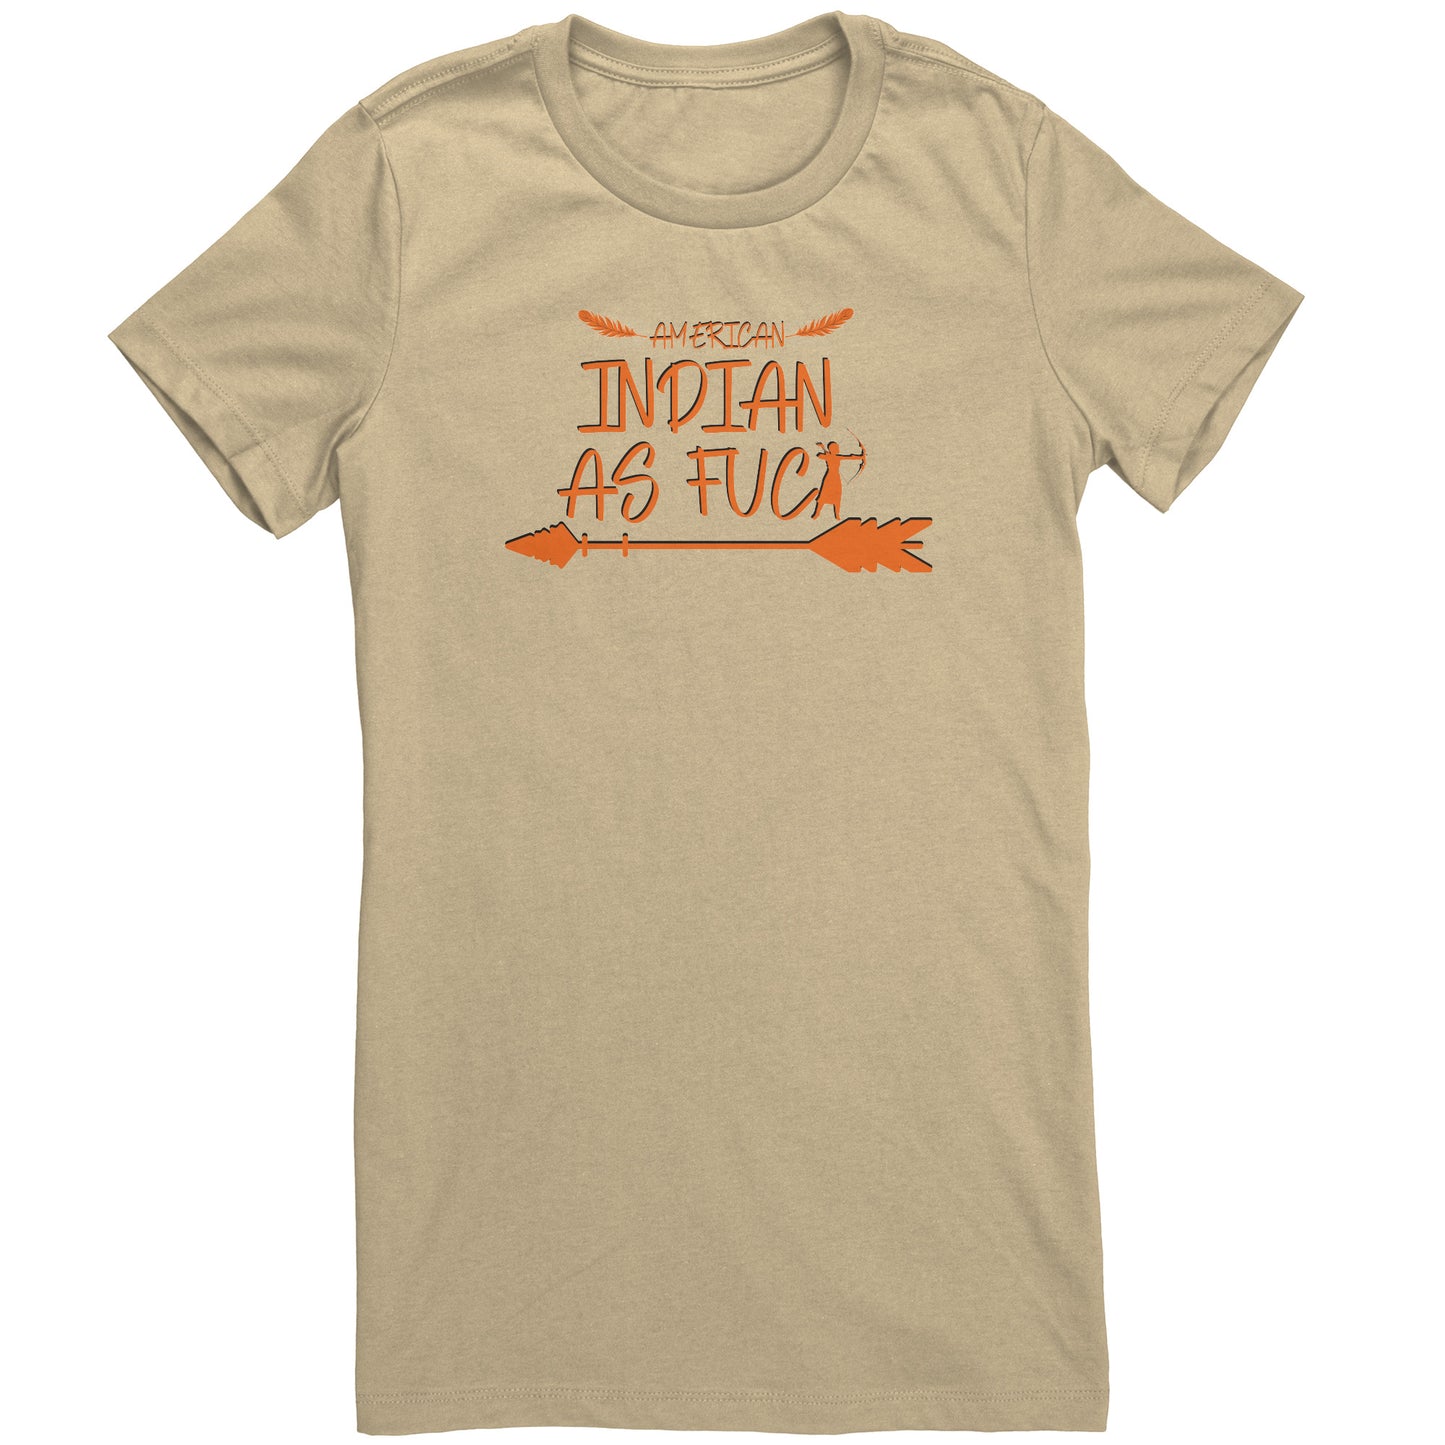 The "American Indian AF" T-Shirt (Women's)